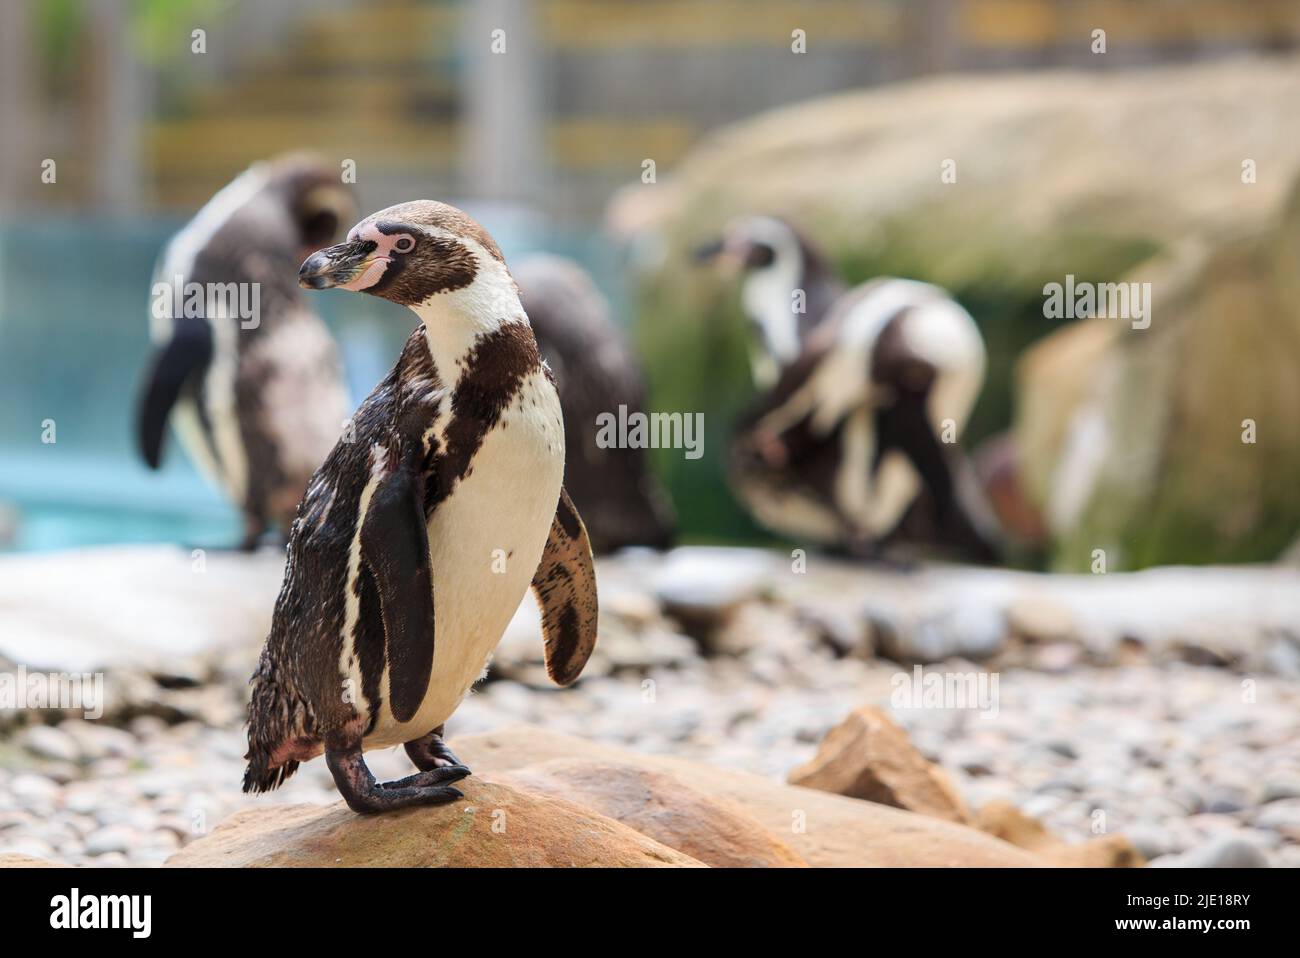 A cute Humboldt Penguin ( Spheniscus humboldti) standing on rocky terrain with morestanding  in the background Stock Photo